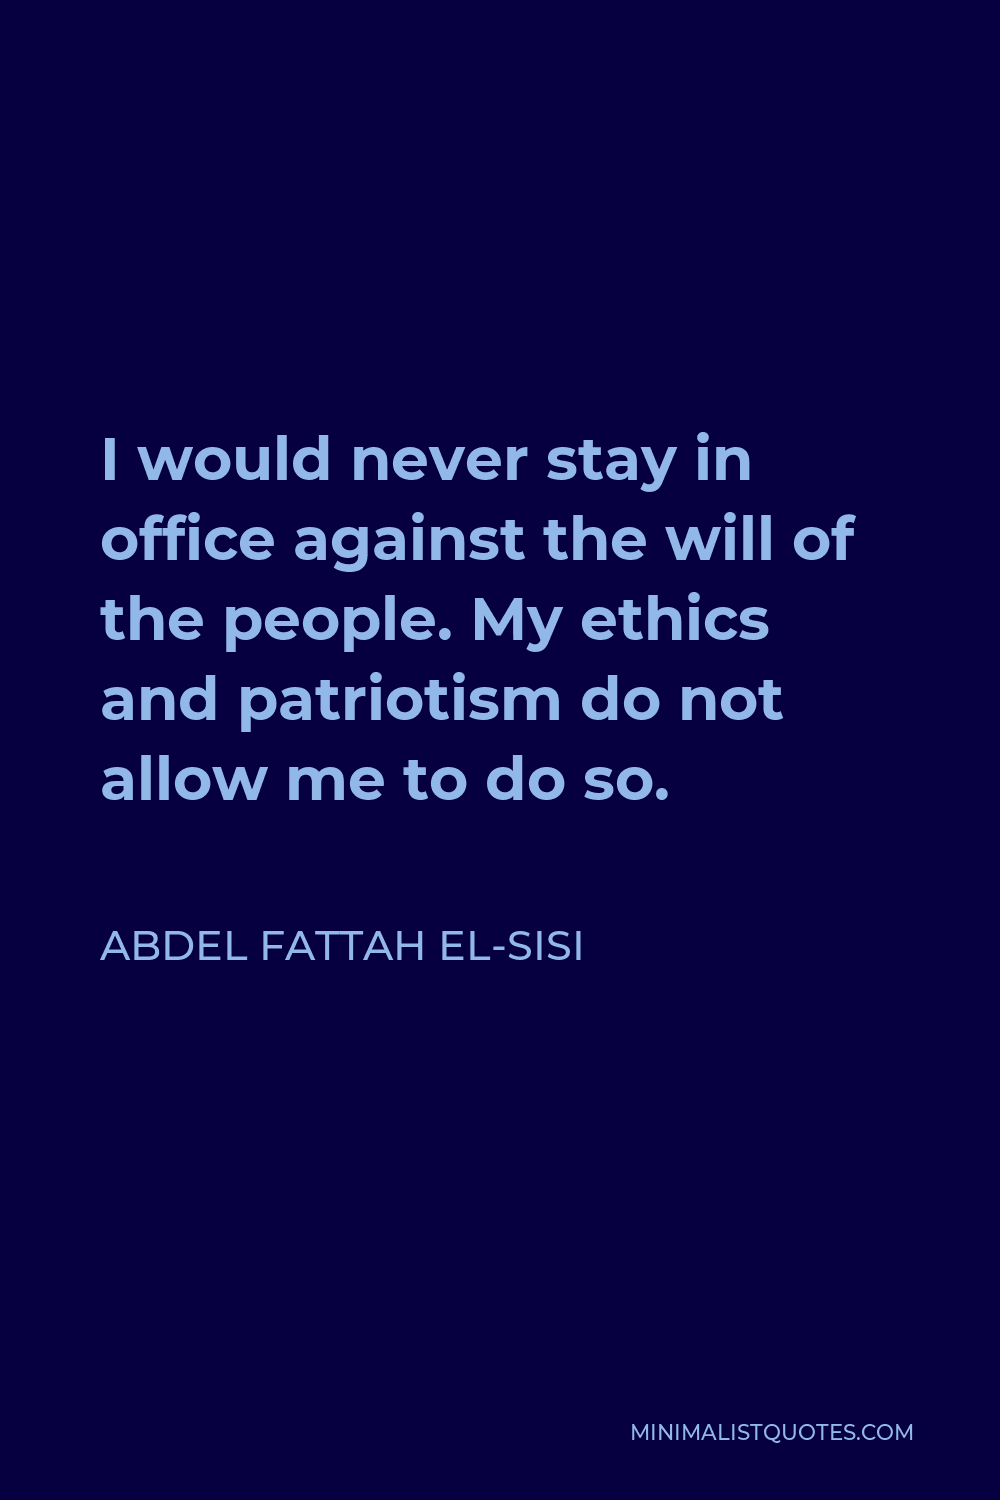 Abdel Fattah el-Sisi Quote - I would never stay in office against the will of the people. My ethics and patriotism do not allow me to do so.